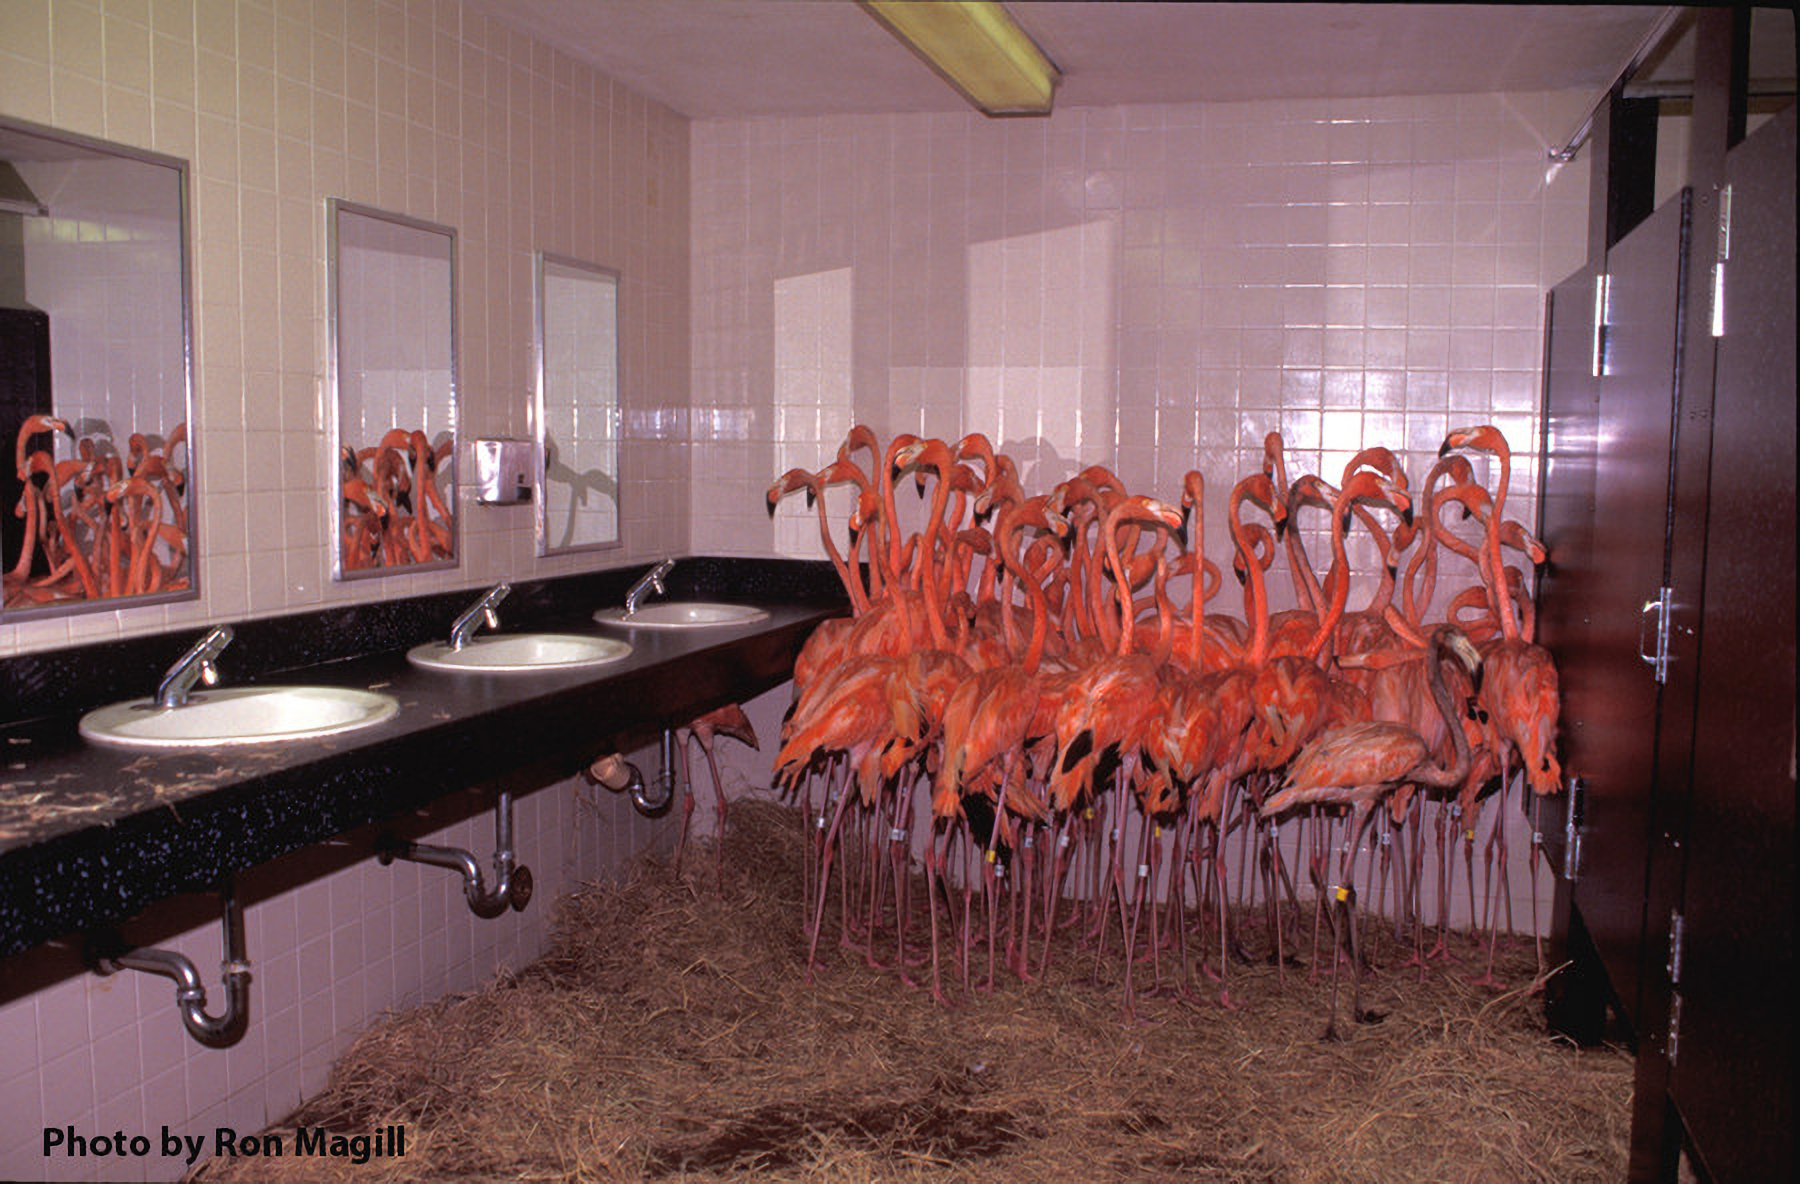 Flamingos huddled together in the bathroom at Miami Zoo during Hurricane Andrew (August 24, 1992)